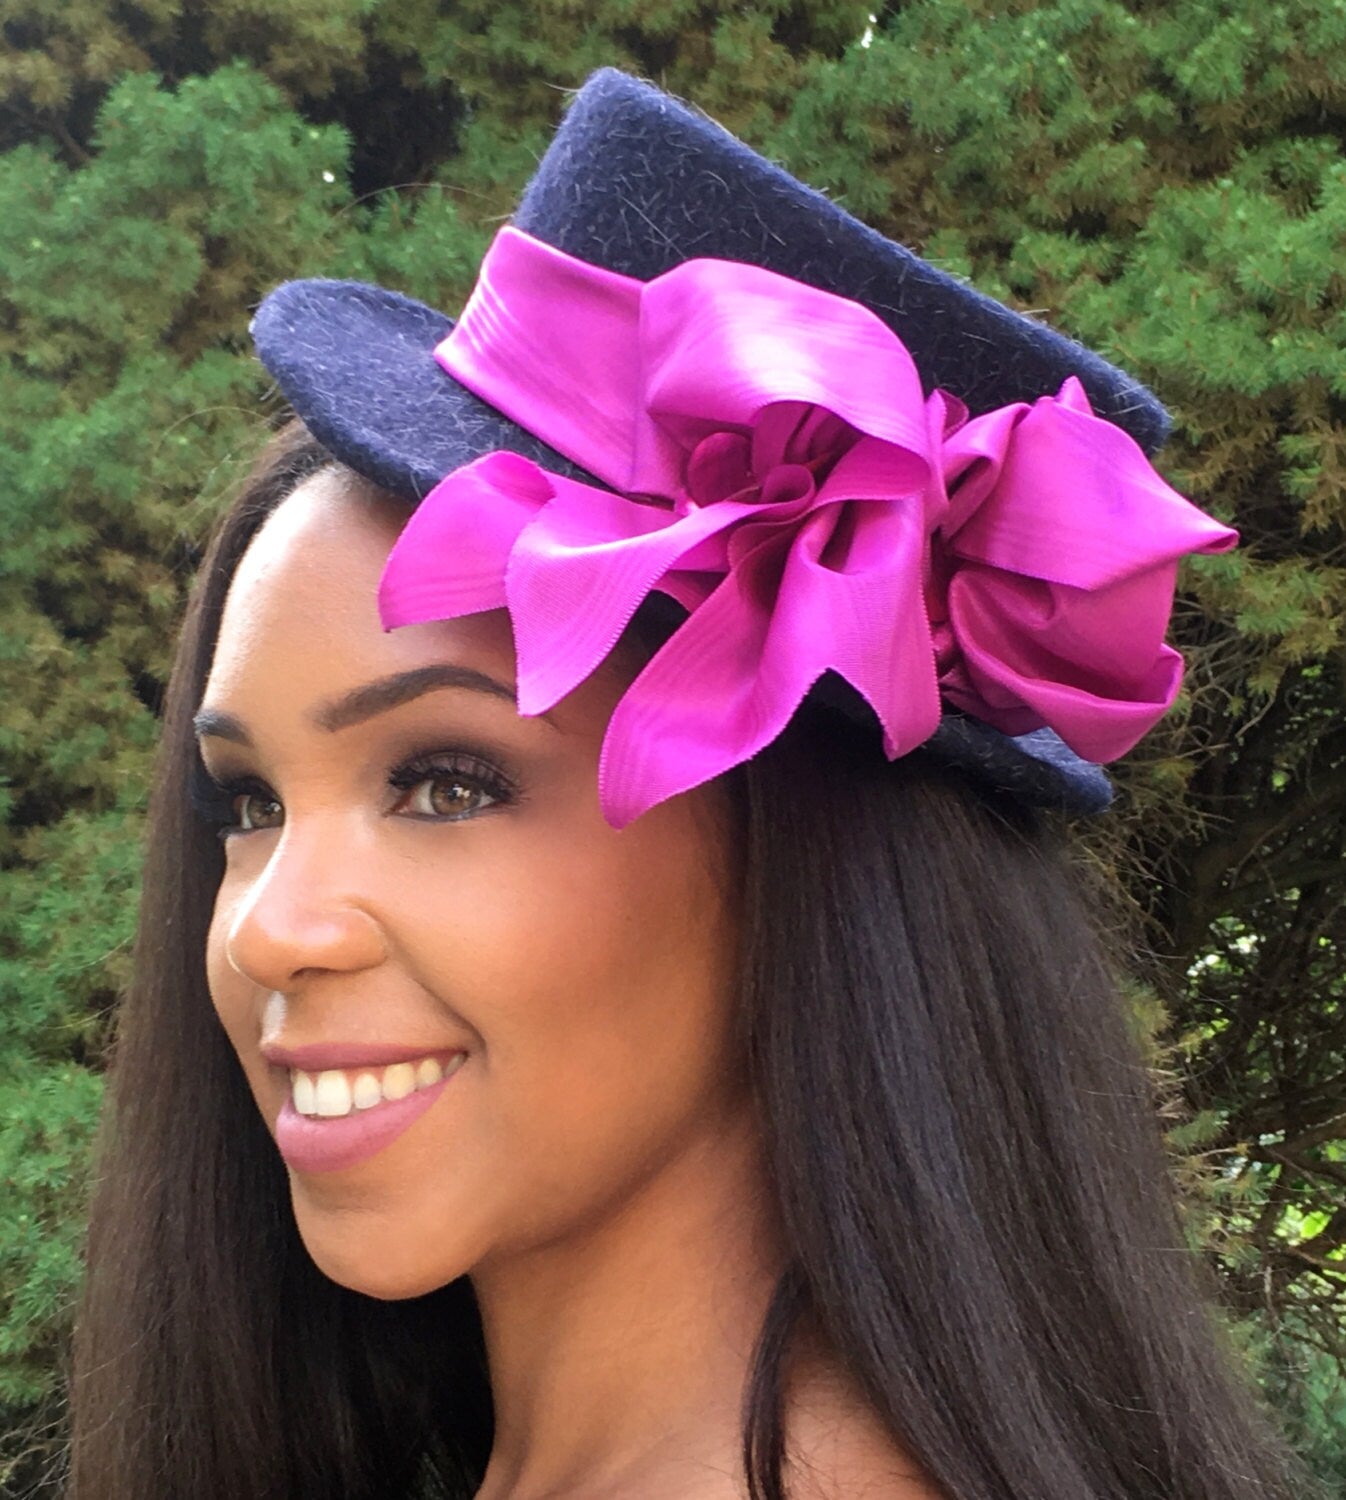 Navy Blue Mini Top Hat with Bright Orchid Pink Moire Ribbon-Jewel stone accents-Winter Races-Church-Polo Matches-Handmade Hat-Weddings-Party